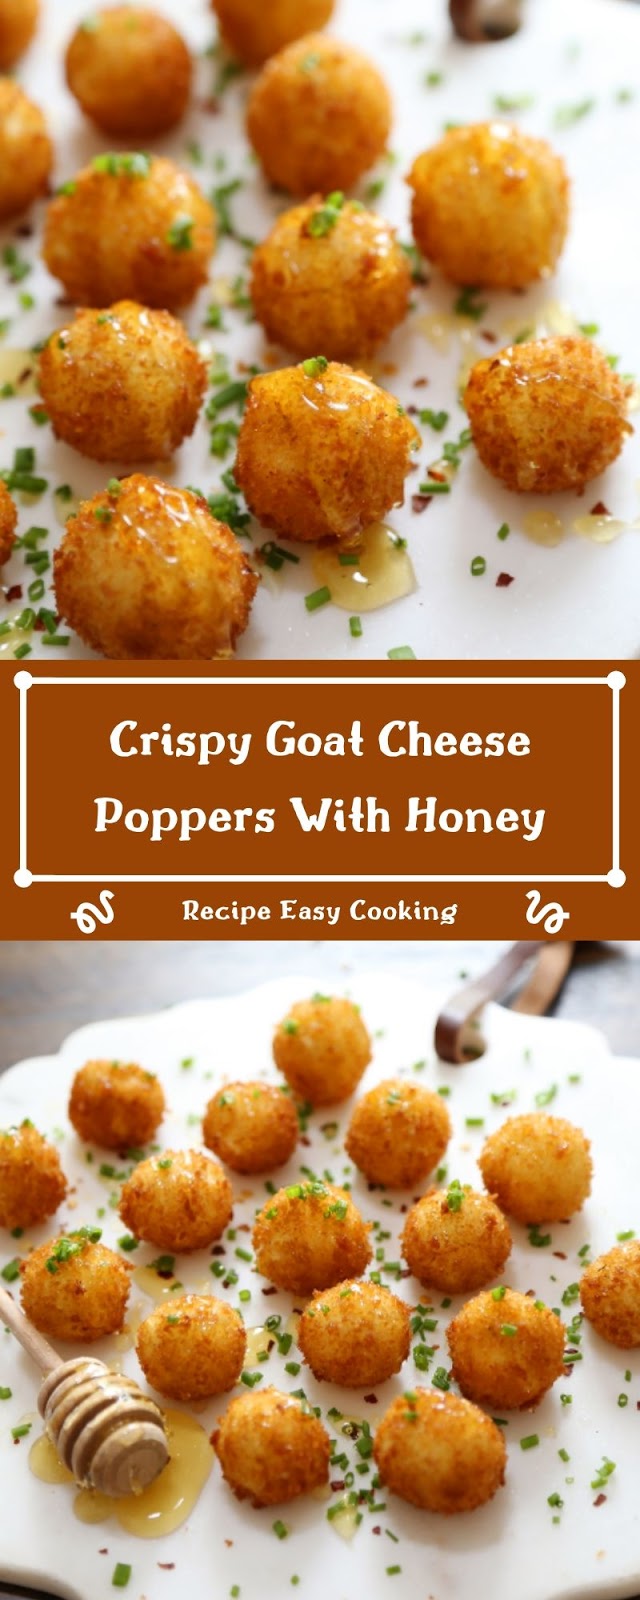 Crispy Goat Cheese Poppers With Honey